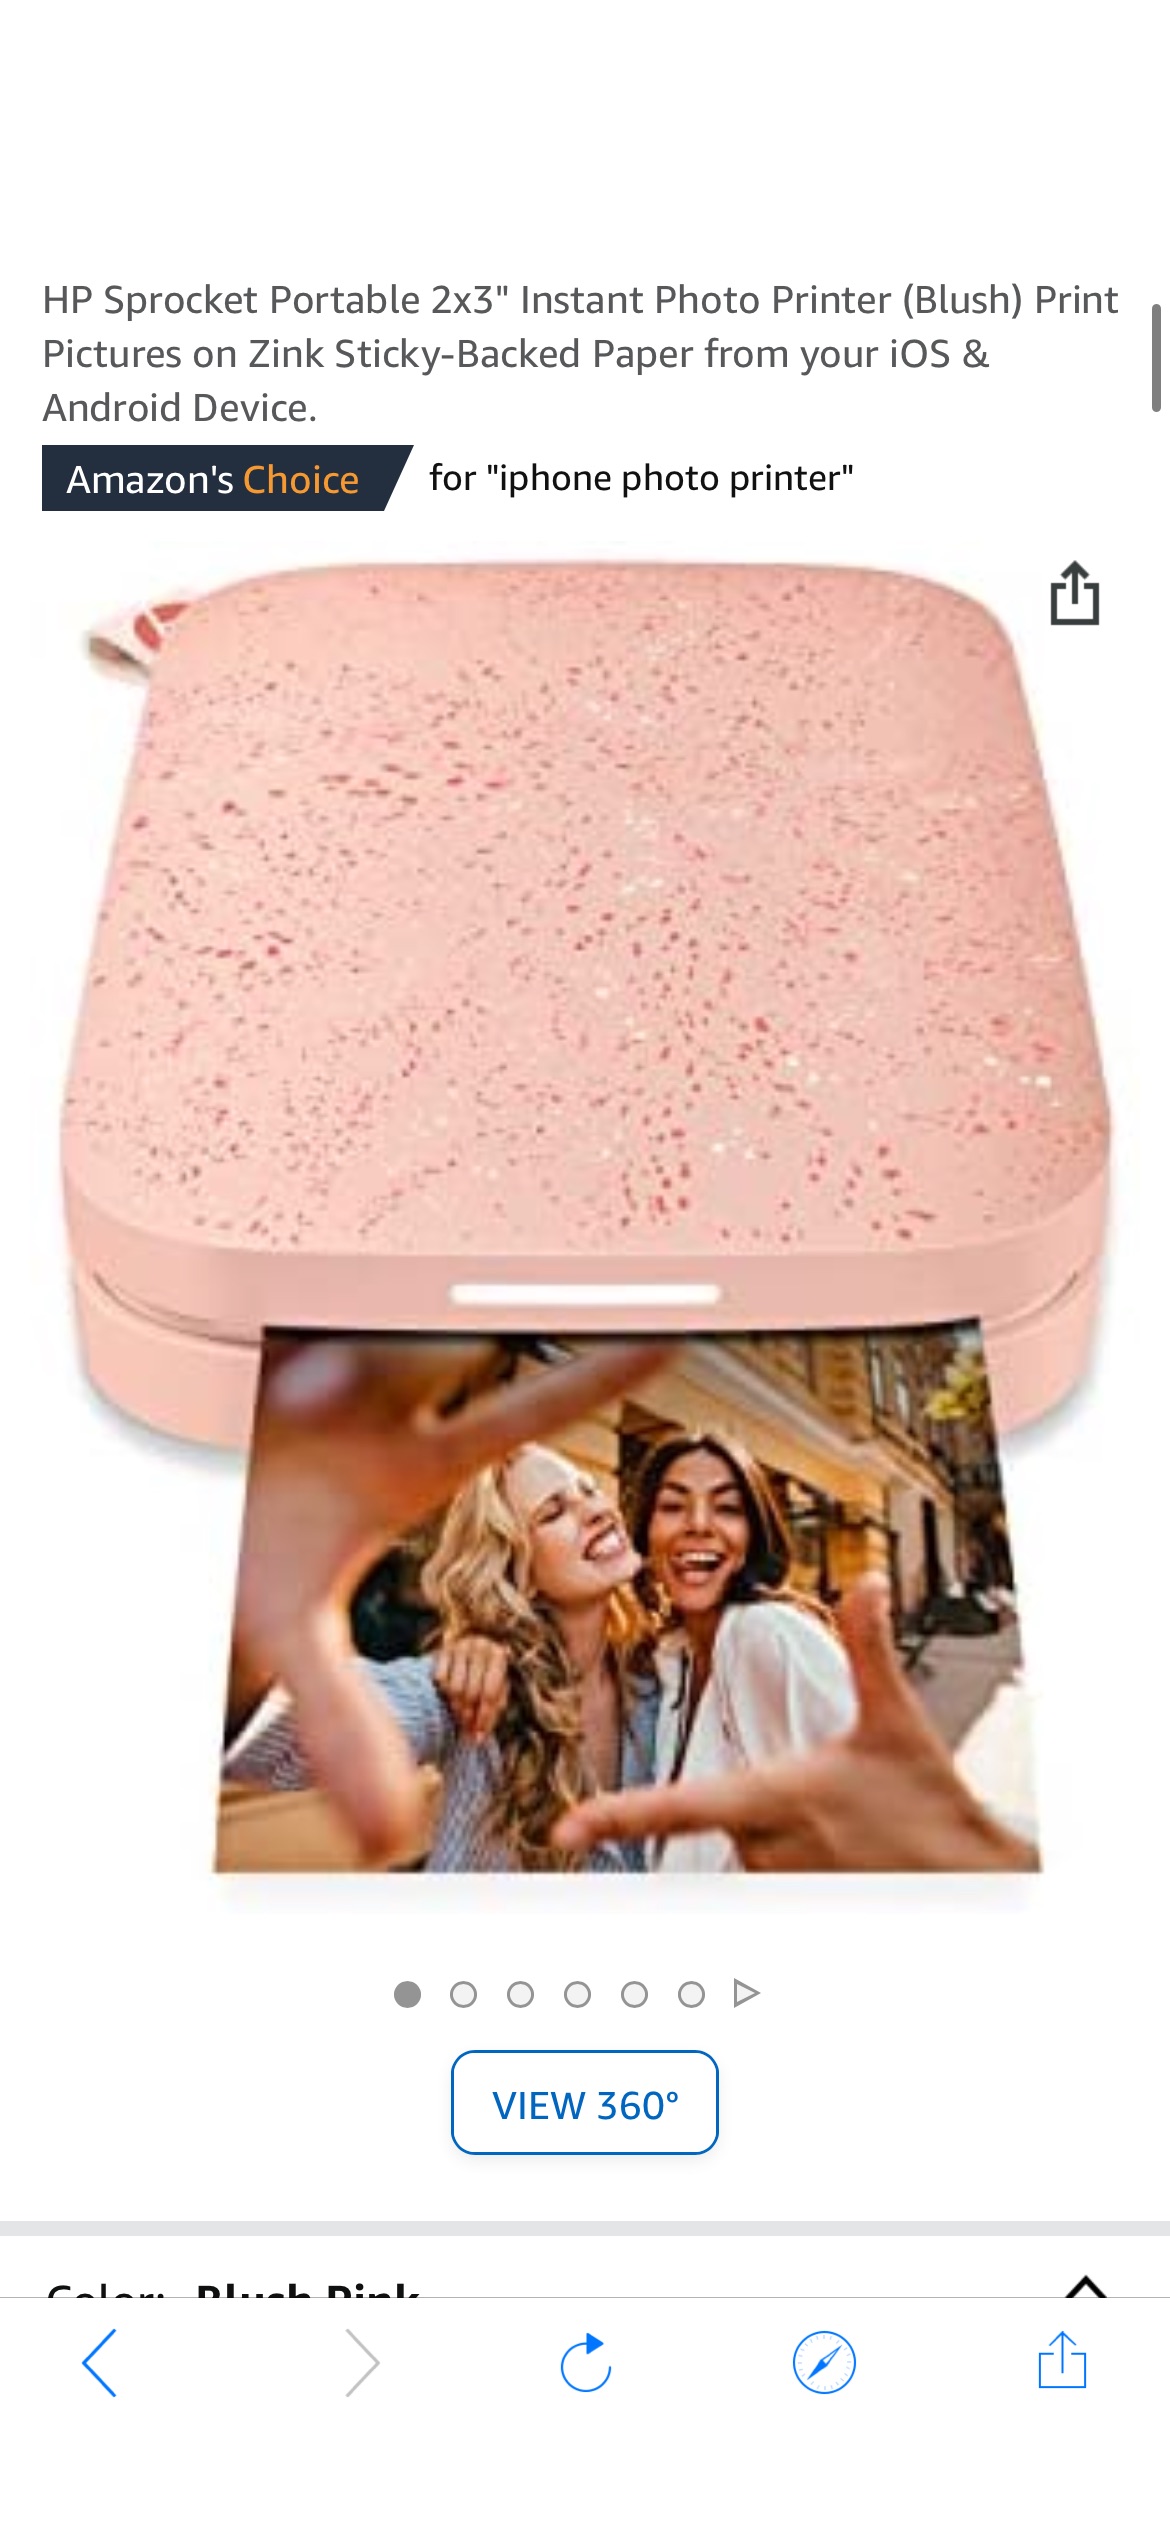 Amazon.com: HP Sprocket Portable 2x3" Instant Photo Printer (Blush) Print Pictures on Zink Sticky-Backed Paper from your iOS & Android Device. : Everything Else 打印机